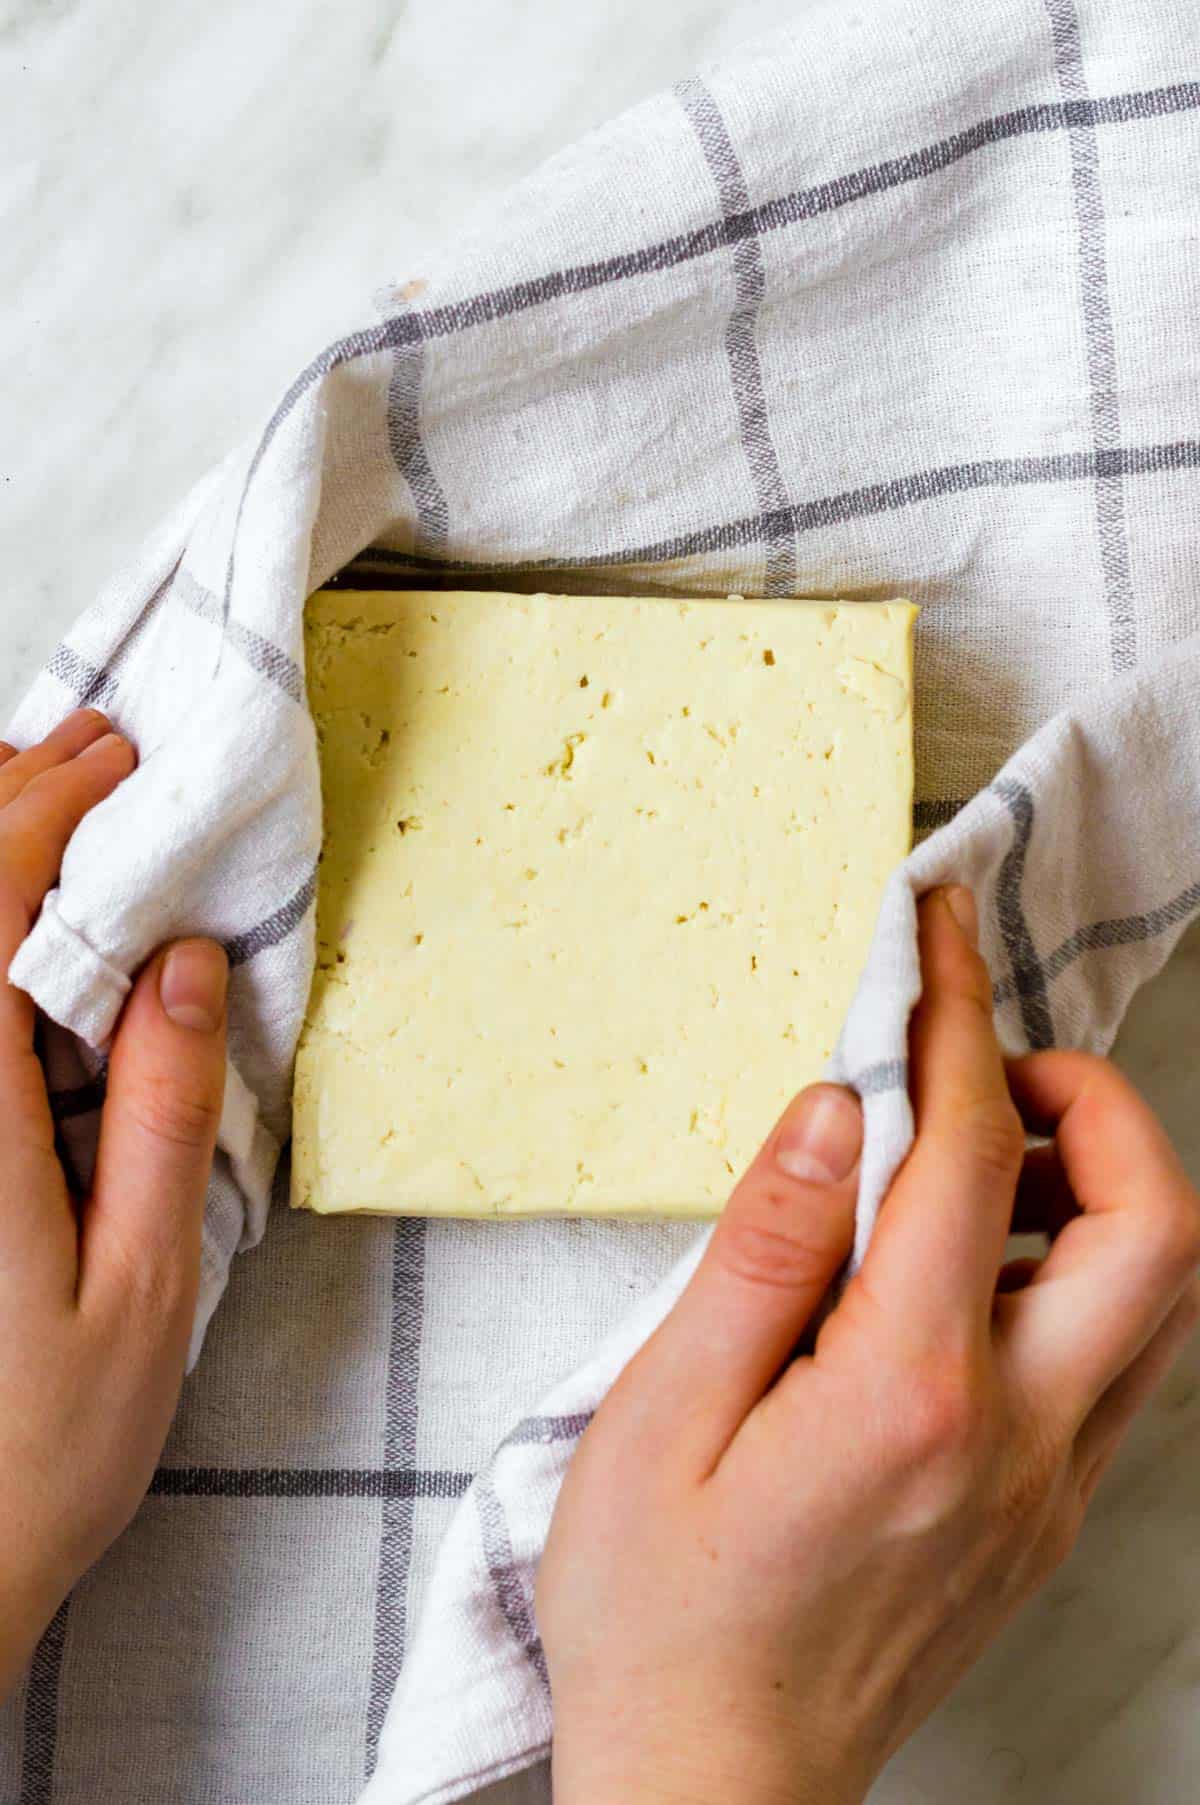 Wrapping a block of tofu in a kitchen towel to press excess liquid.